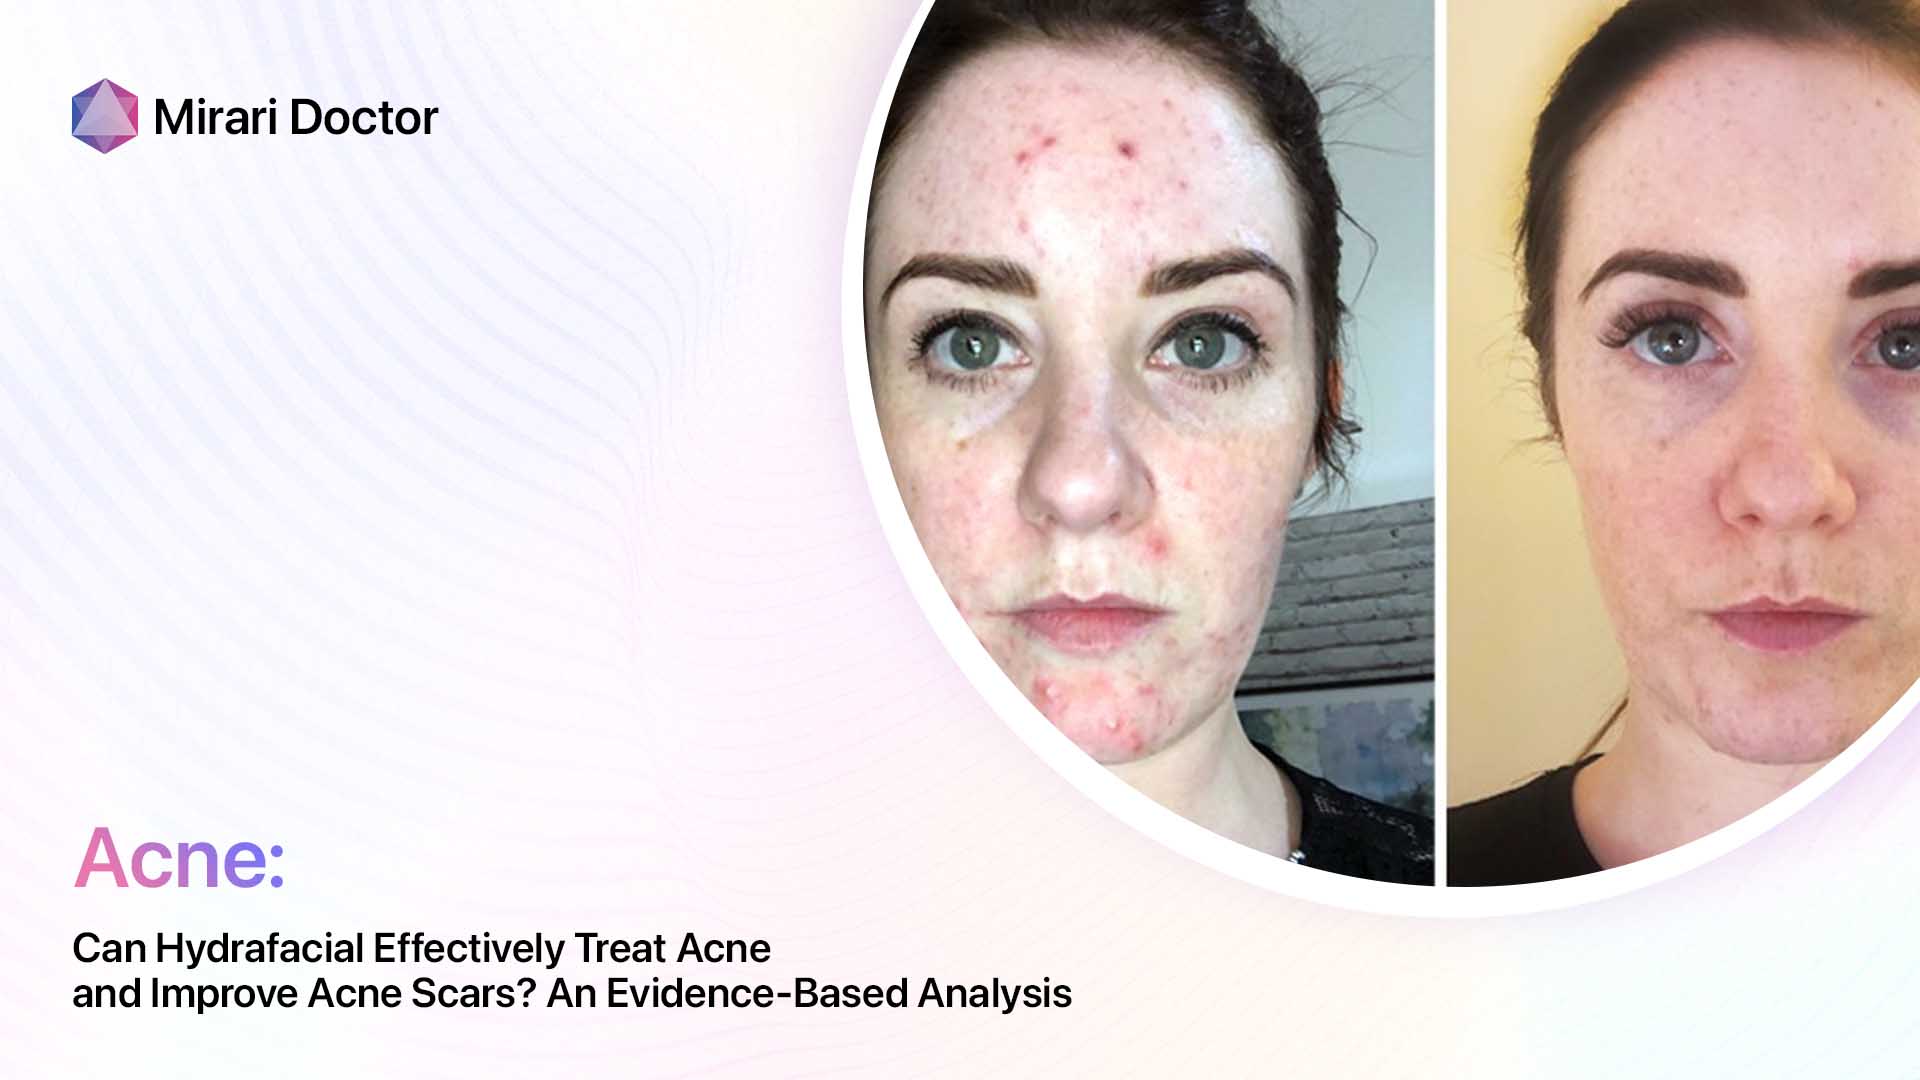 Featured image for “Can Hydrafacial Effectively Treat Acne and Improve Acne Scars? An Evidence-Based Analysis”